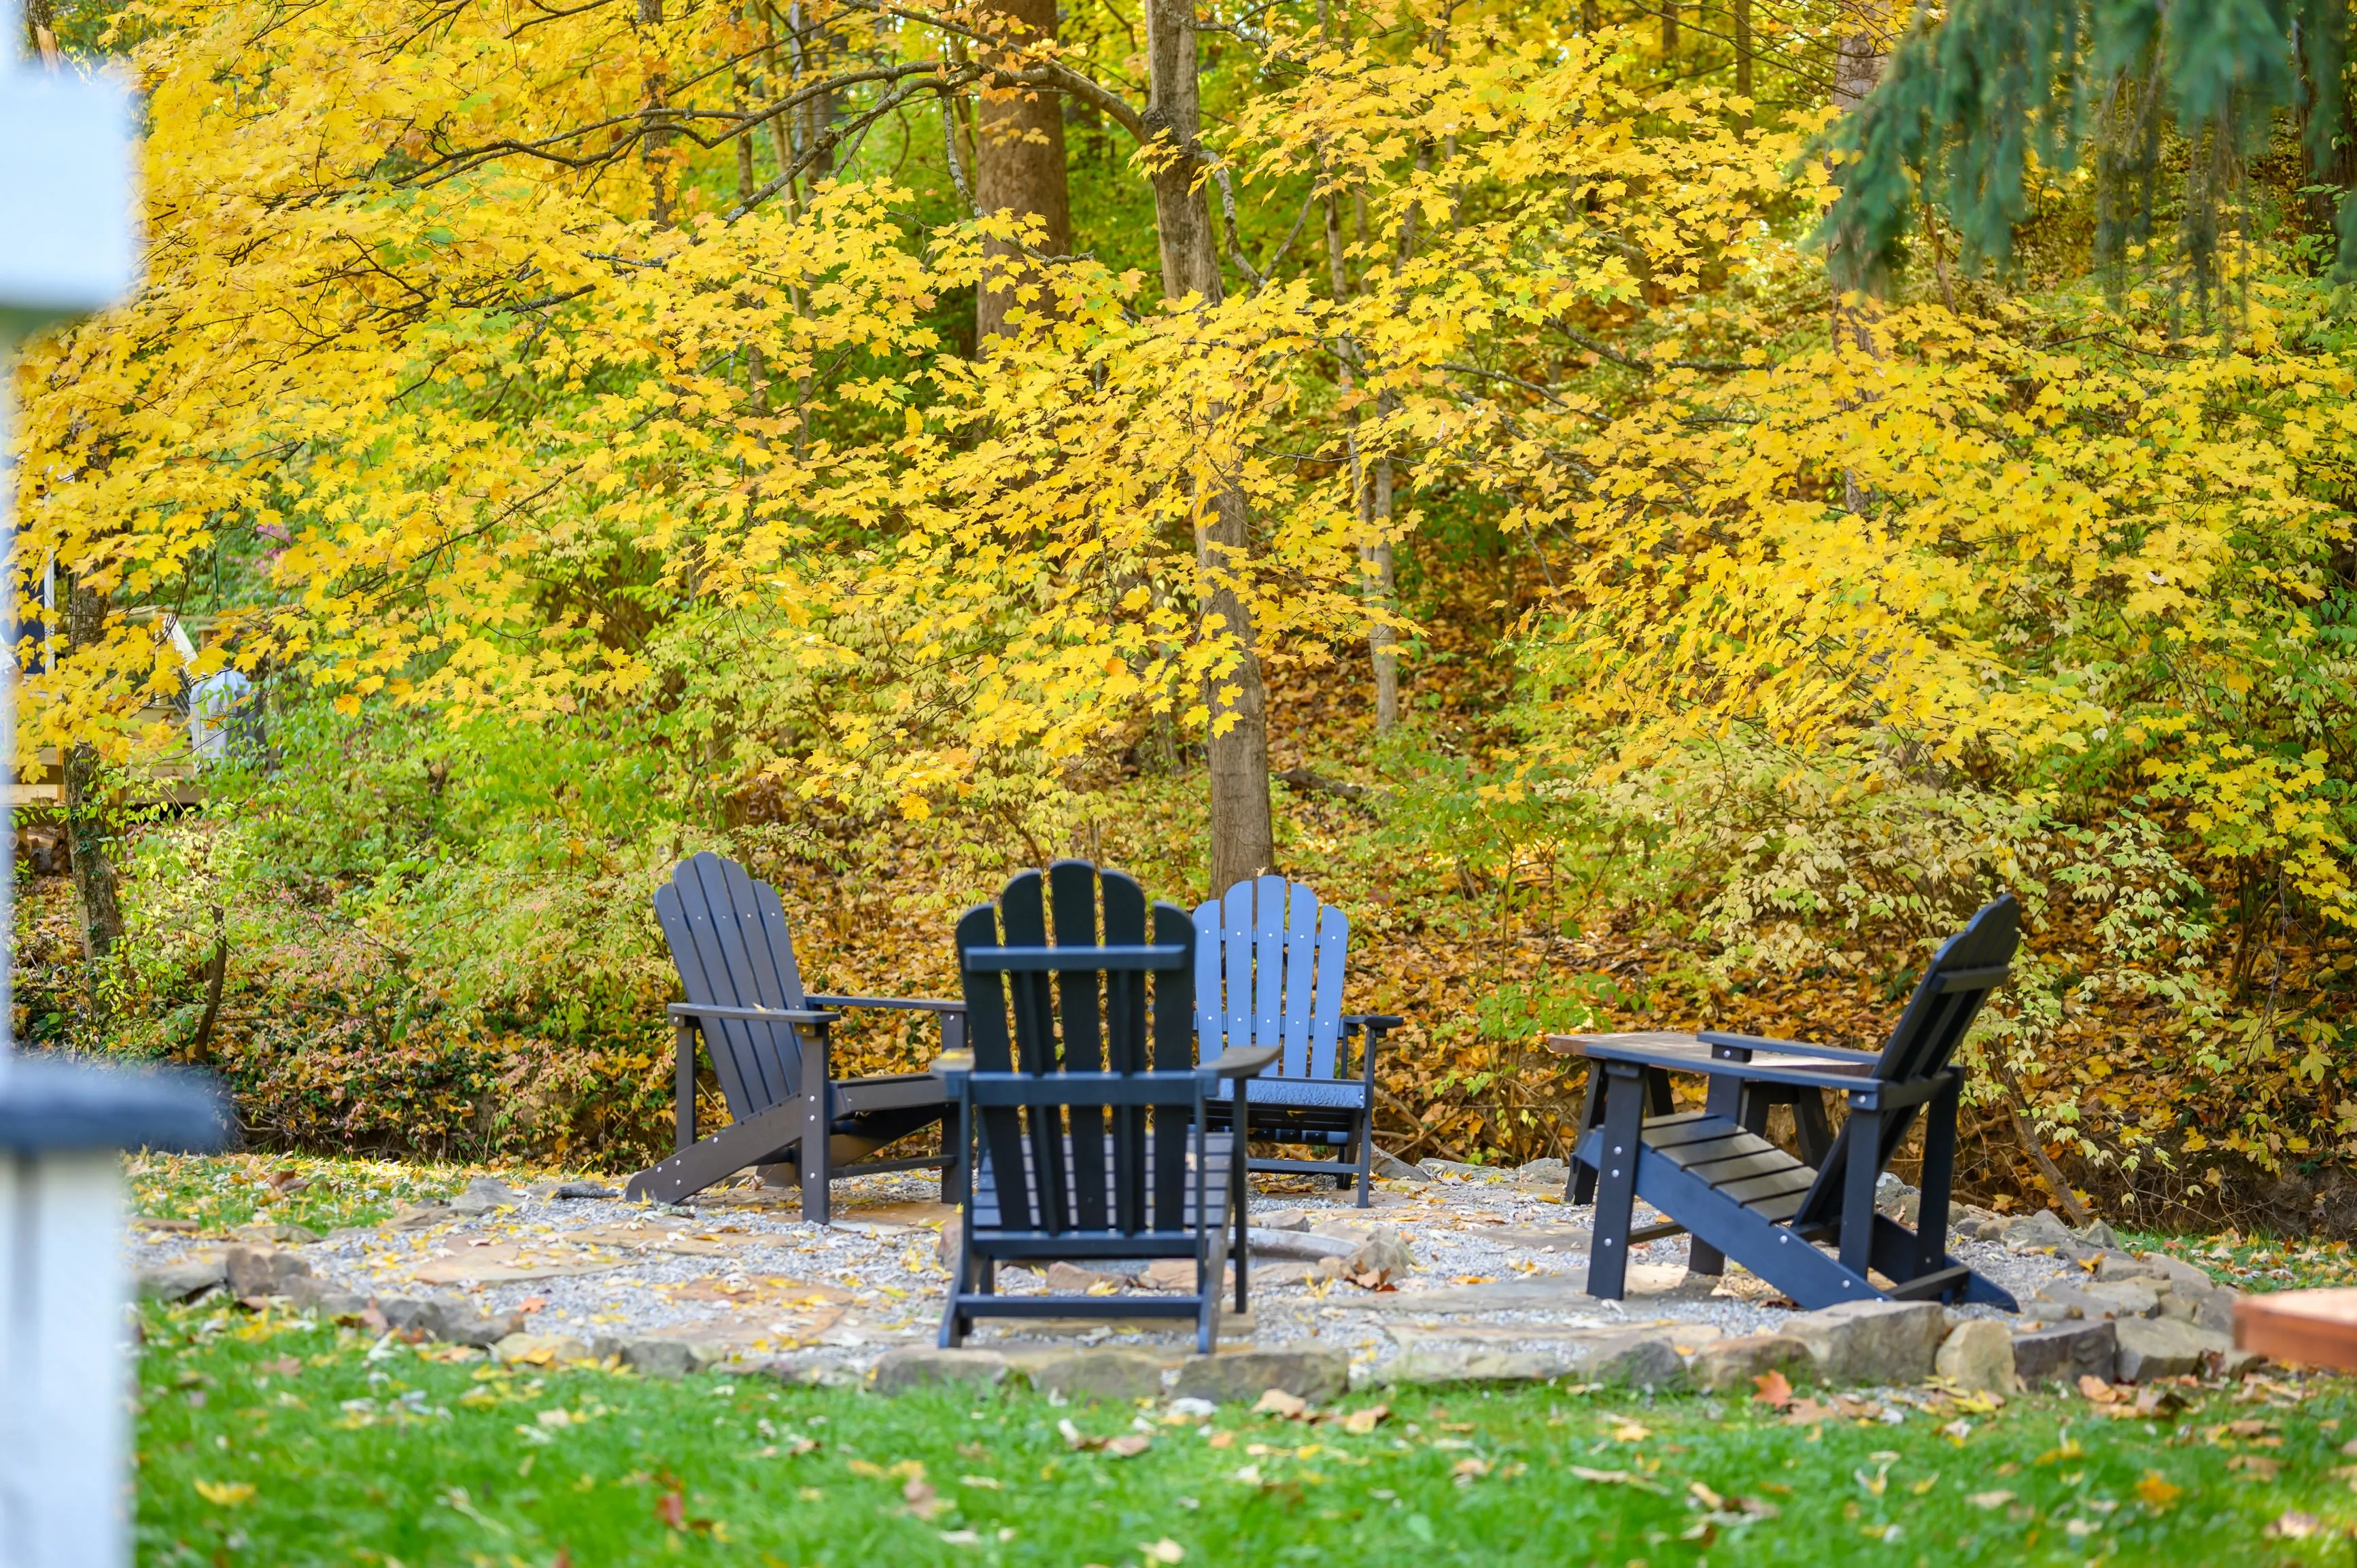 A cozy backyard setting with Adirondack chairs surrounded by trees with autumn leaves.